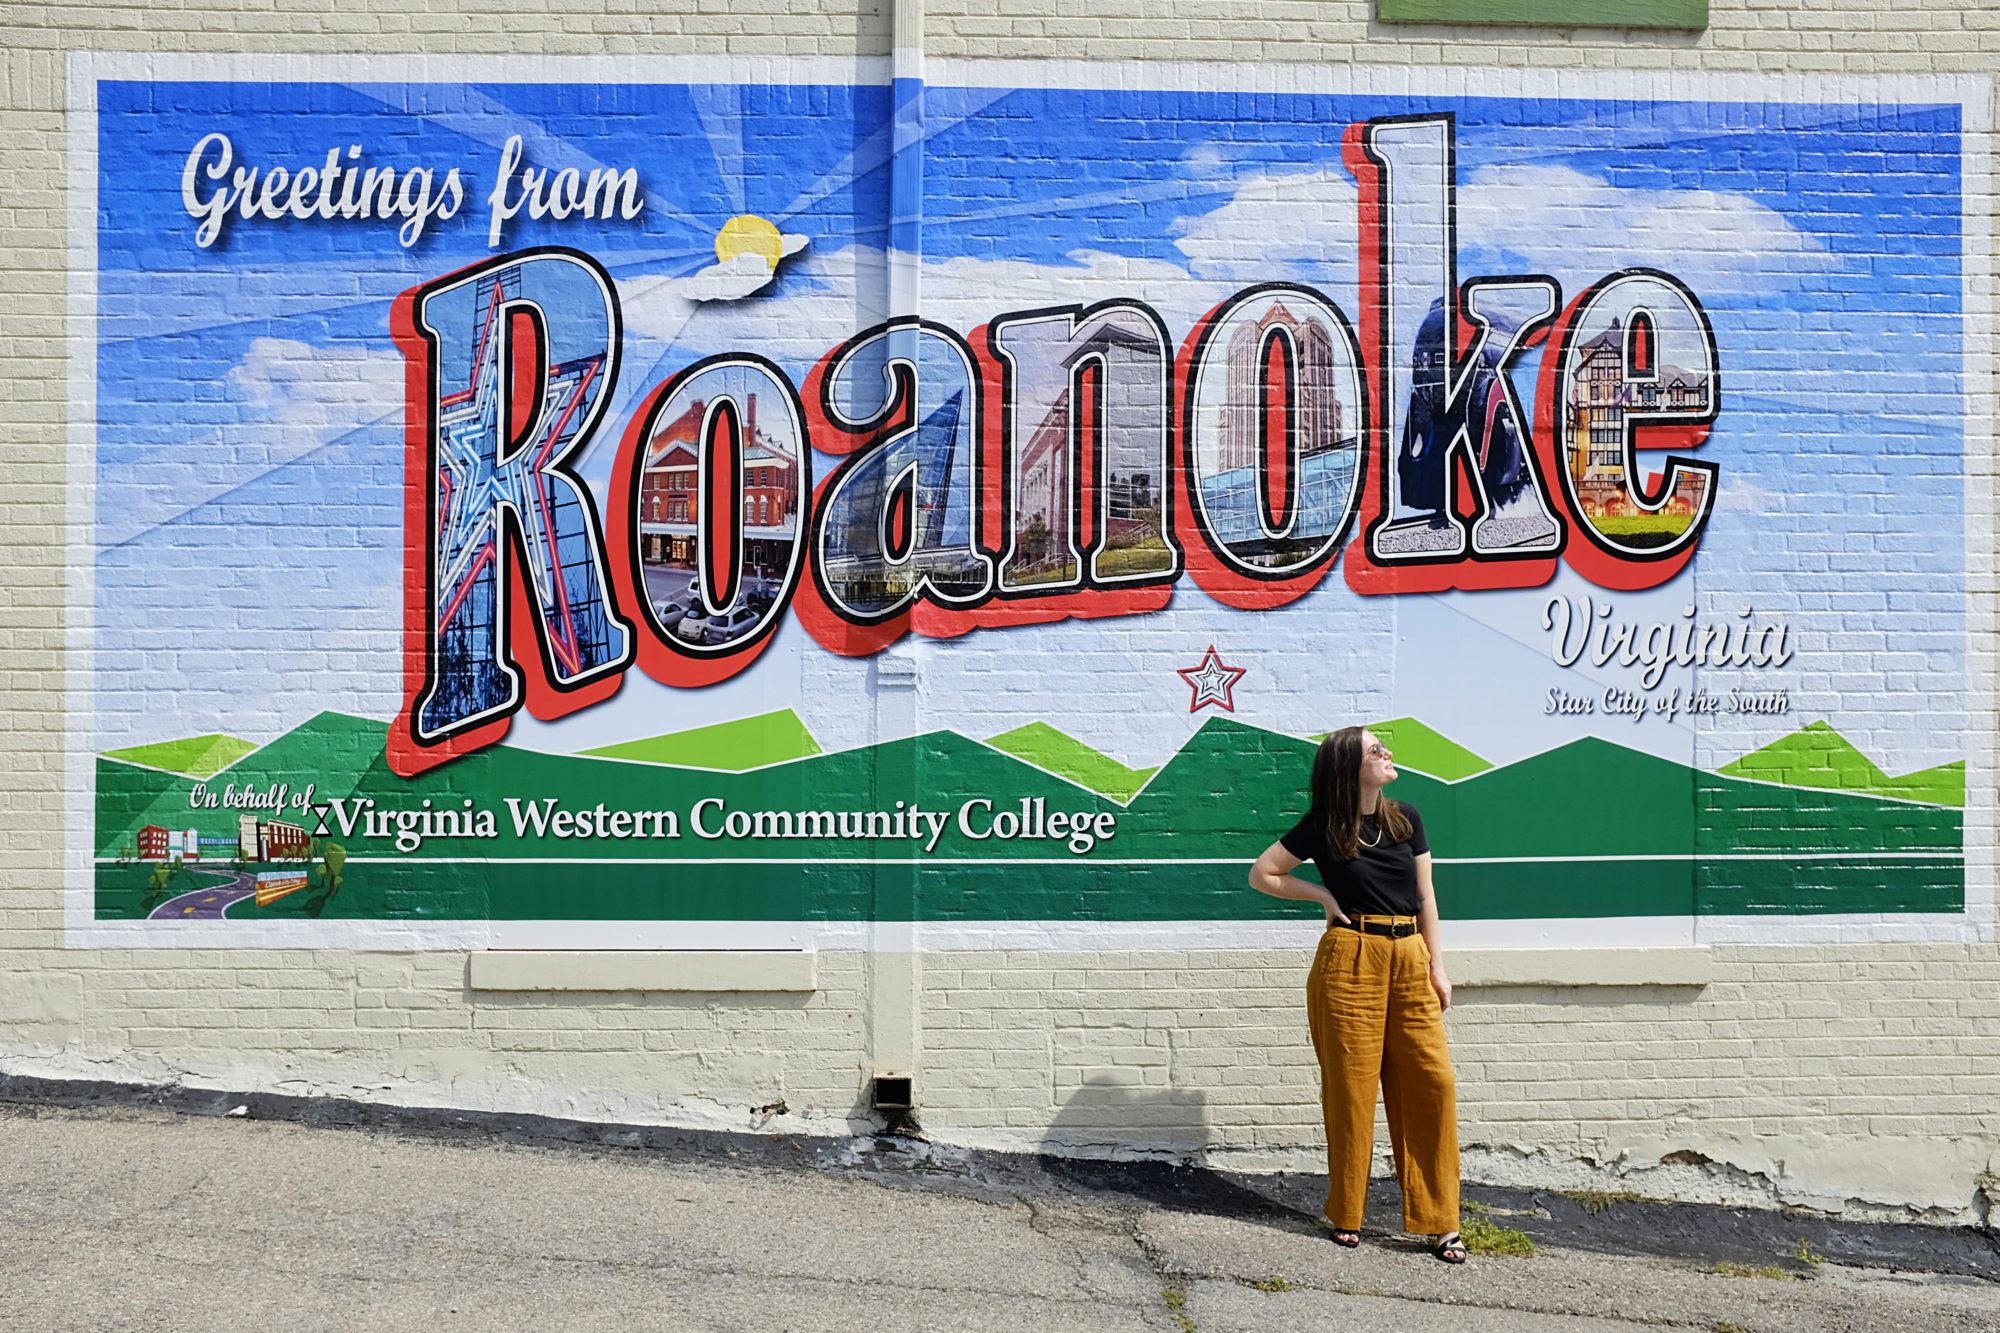 Alyssa stands in front of the Greetings from Roanoke sign